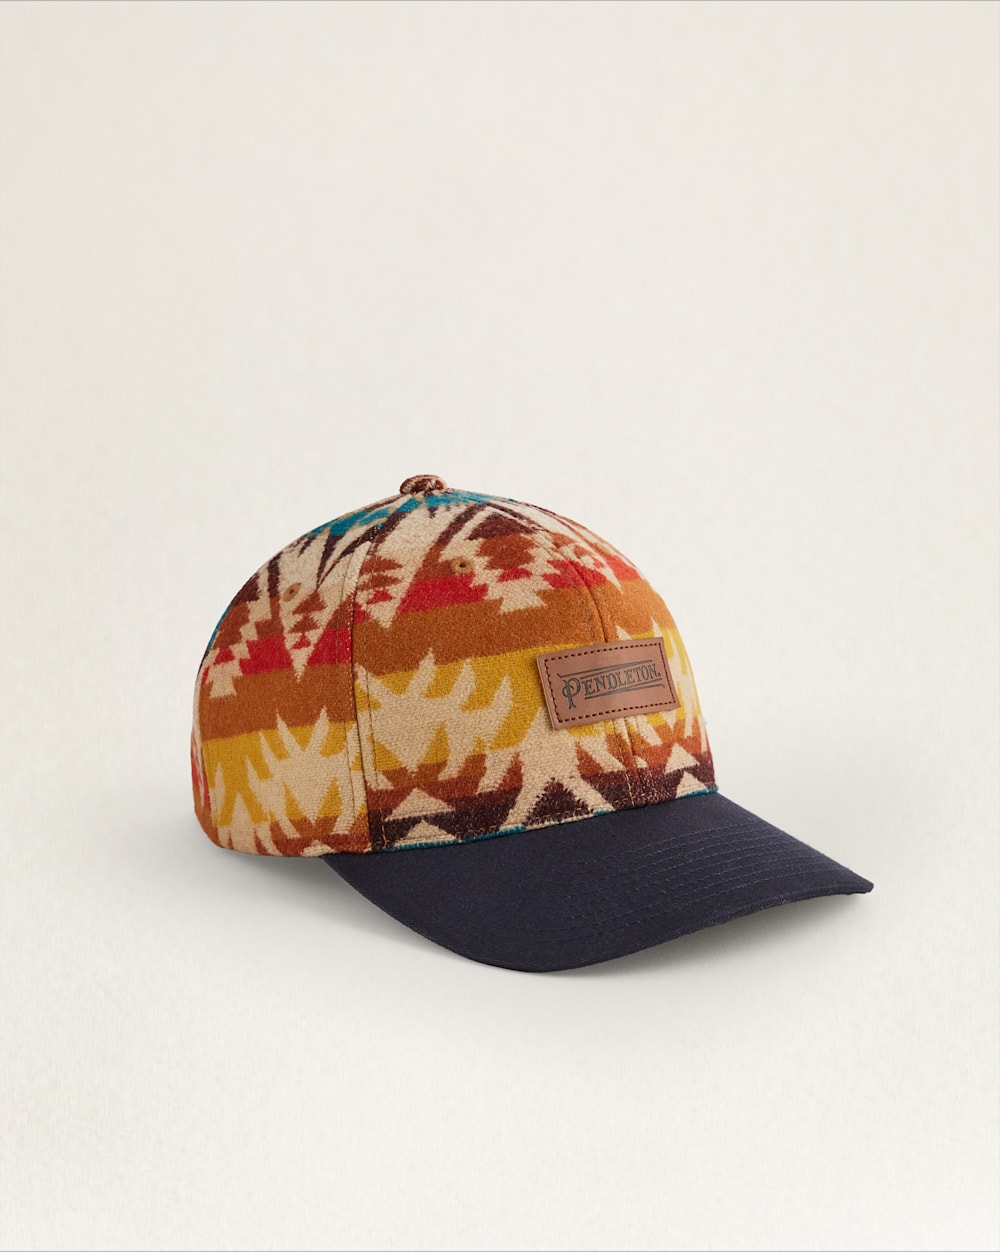 ALTERNATE VIEW OF PASCO WOOL HAT IN SUNSET MULTI image number 2